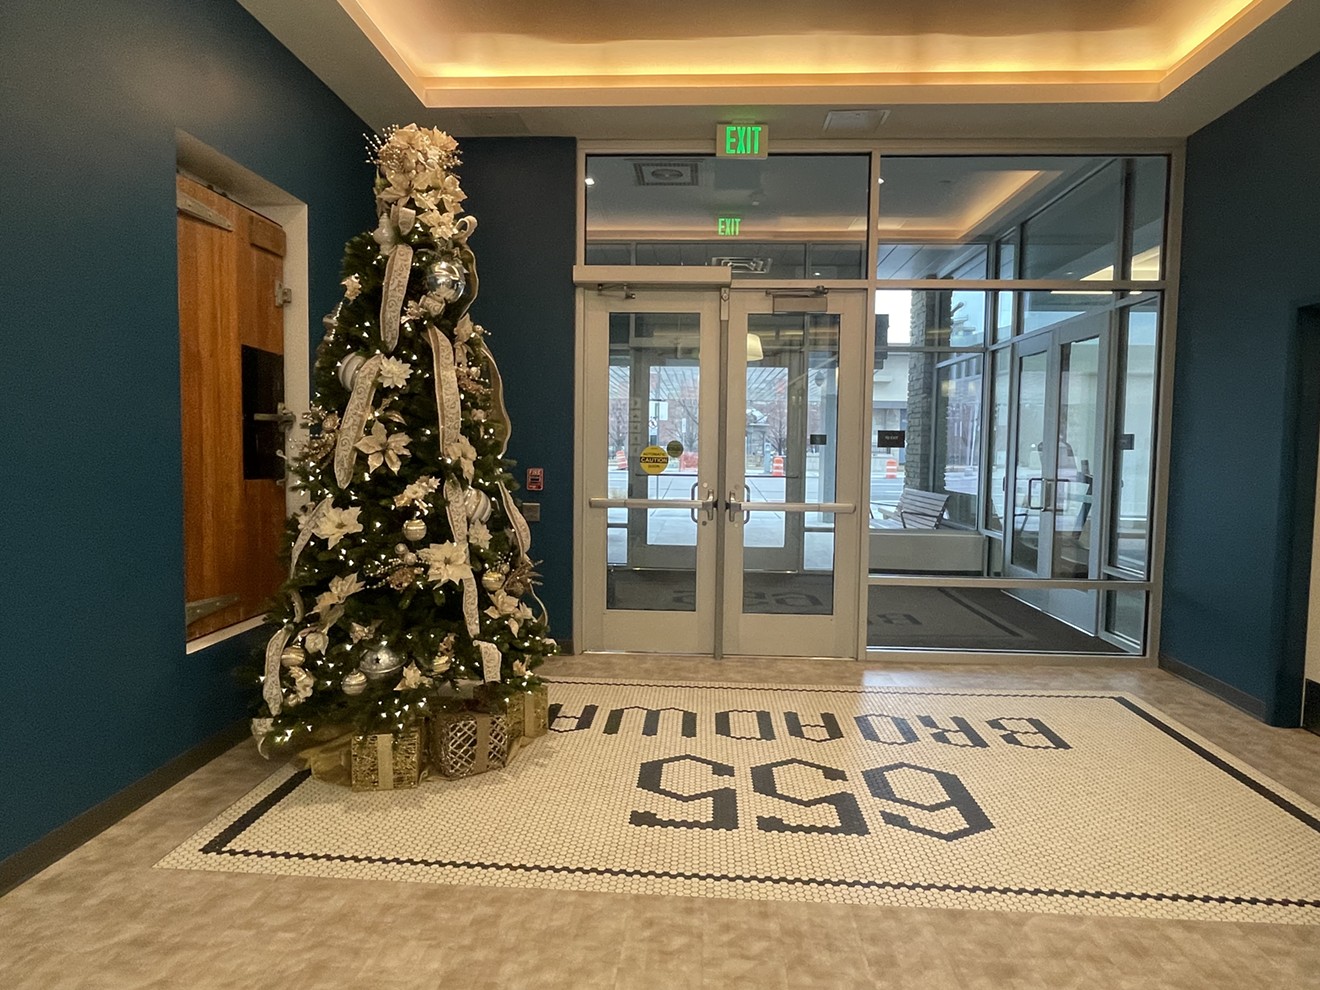 The property at 655 Broadway opened its doors in December.